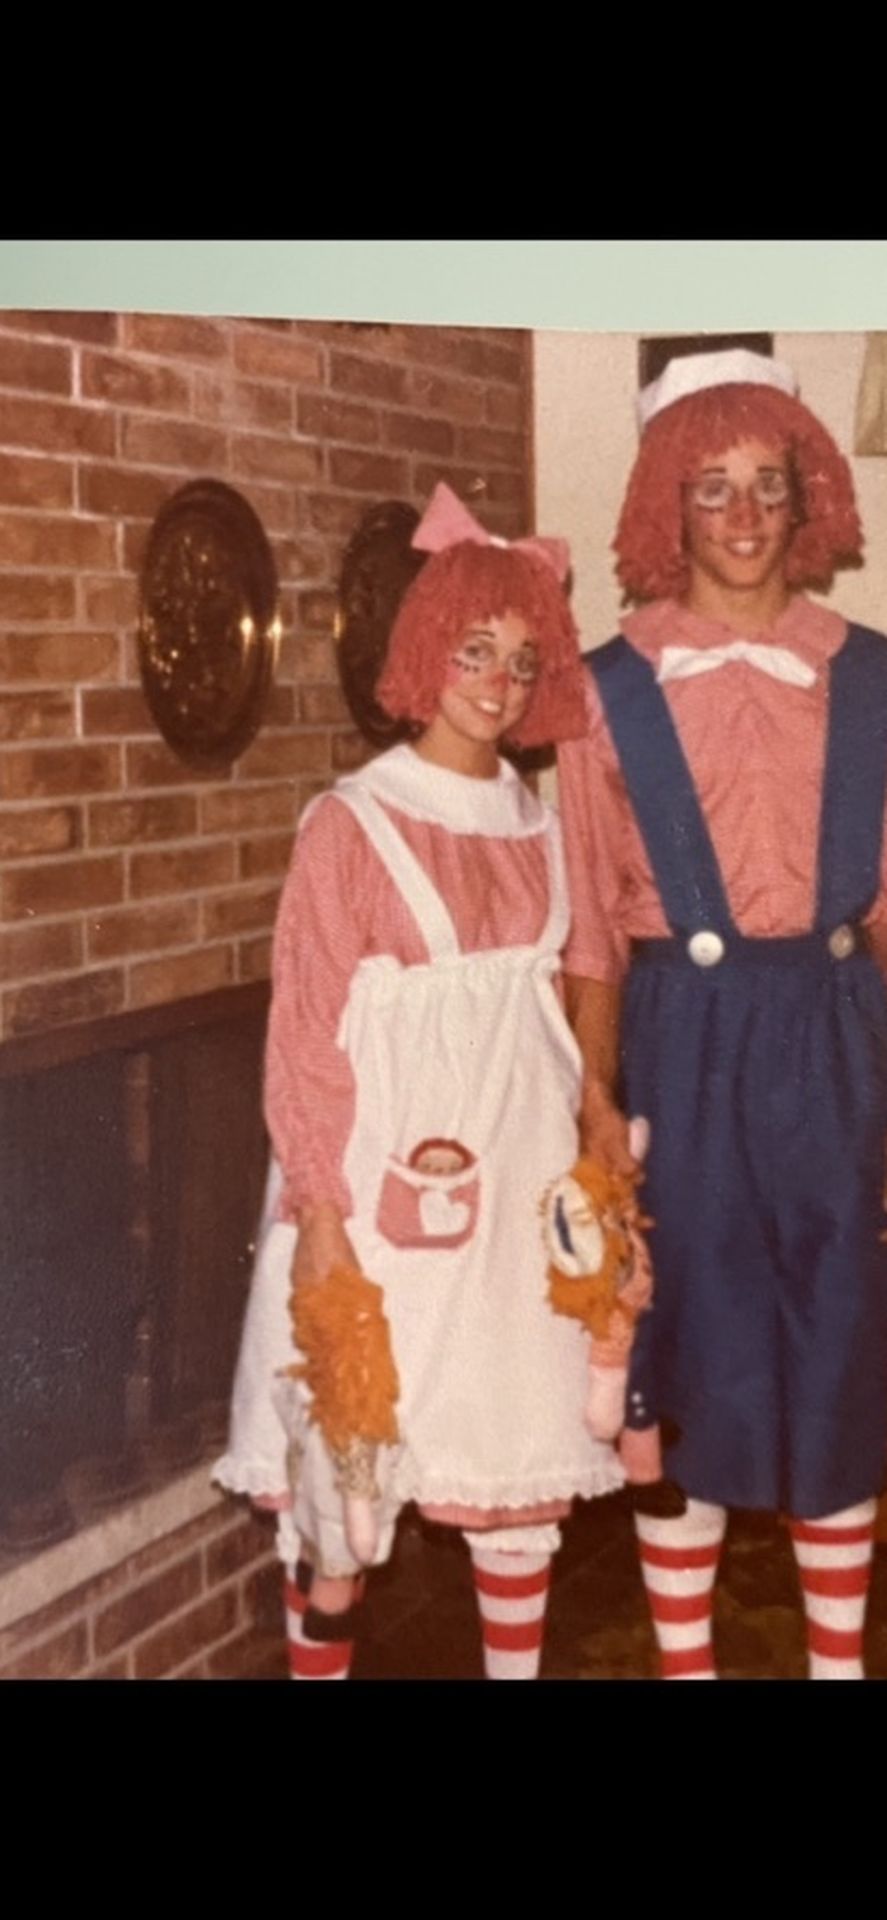 Raggedy Ann & Andy Costumes